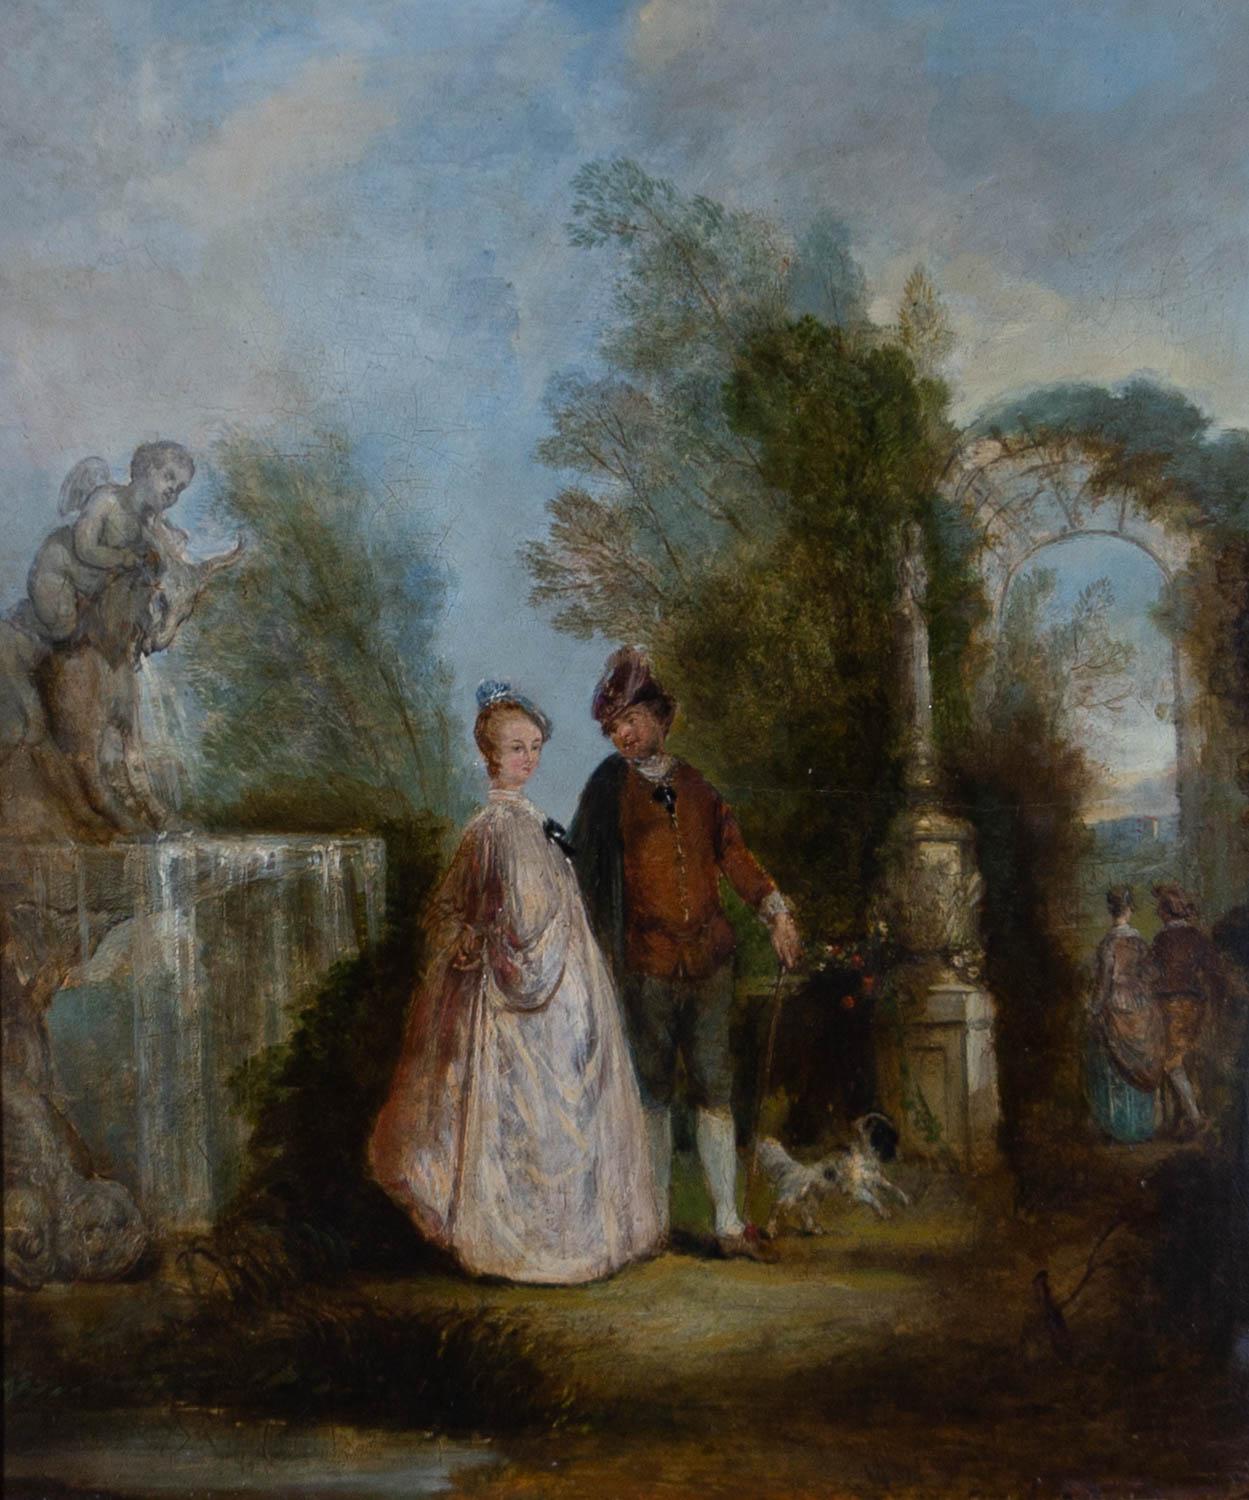 We are thrilled to have acquired this fine mid 19th Century oil, attributed to the genre scene painter Henry Andrews (1794-1868). The scene shows an elegantly dressed couple, the woman in a flowing white dress and the man in britches and a rust